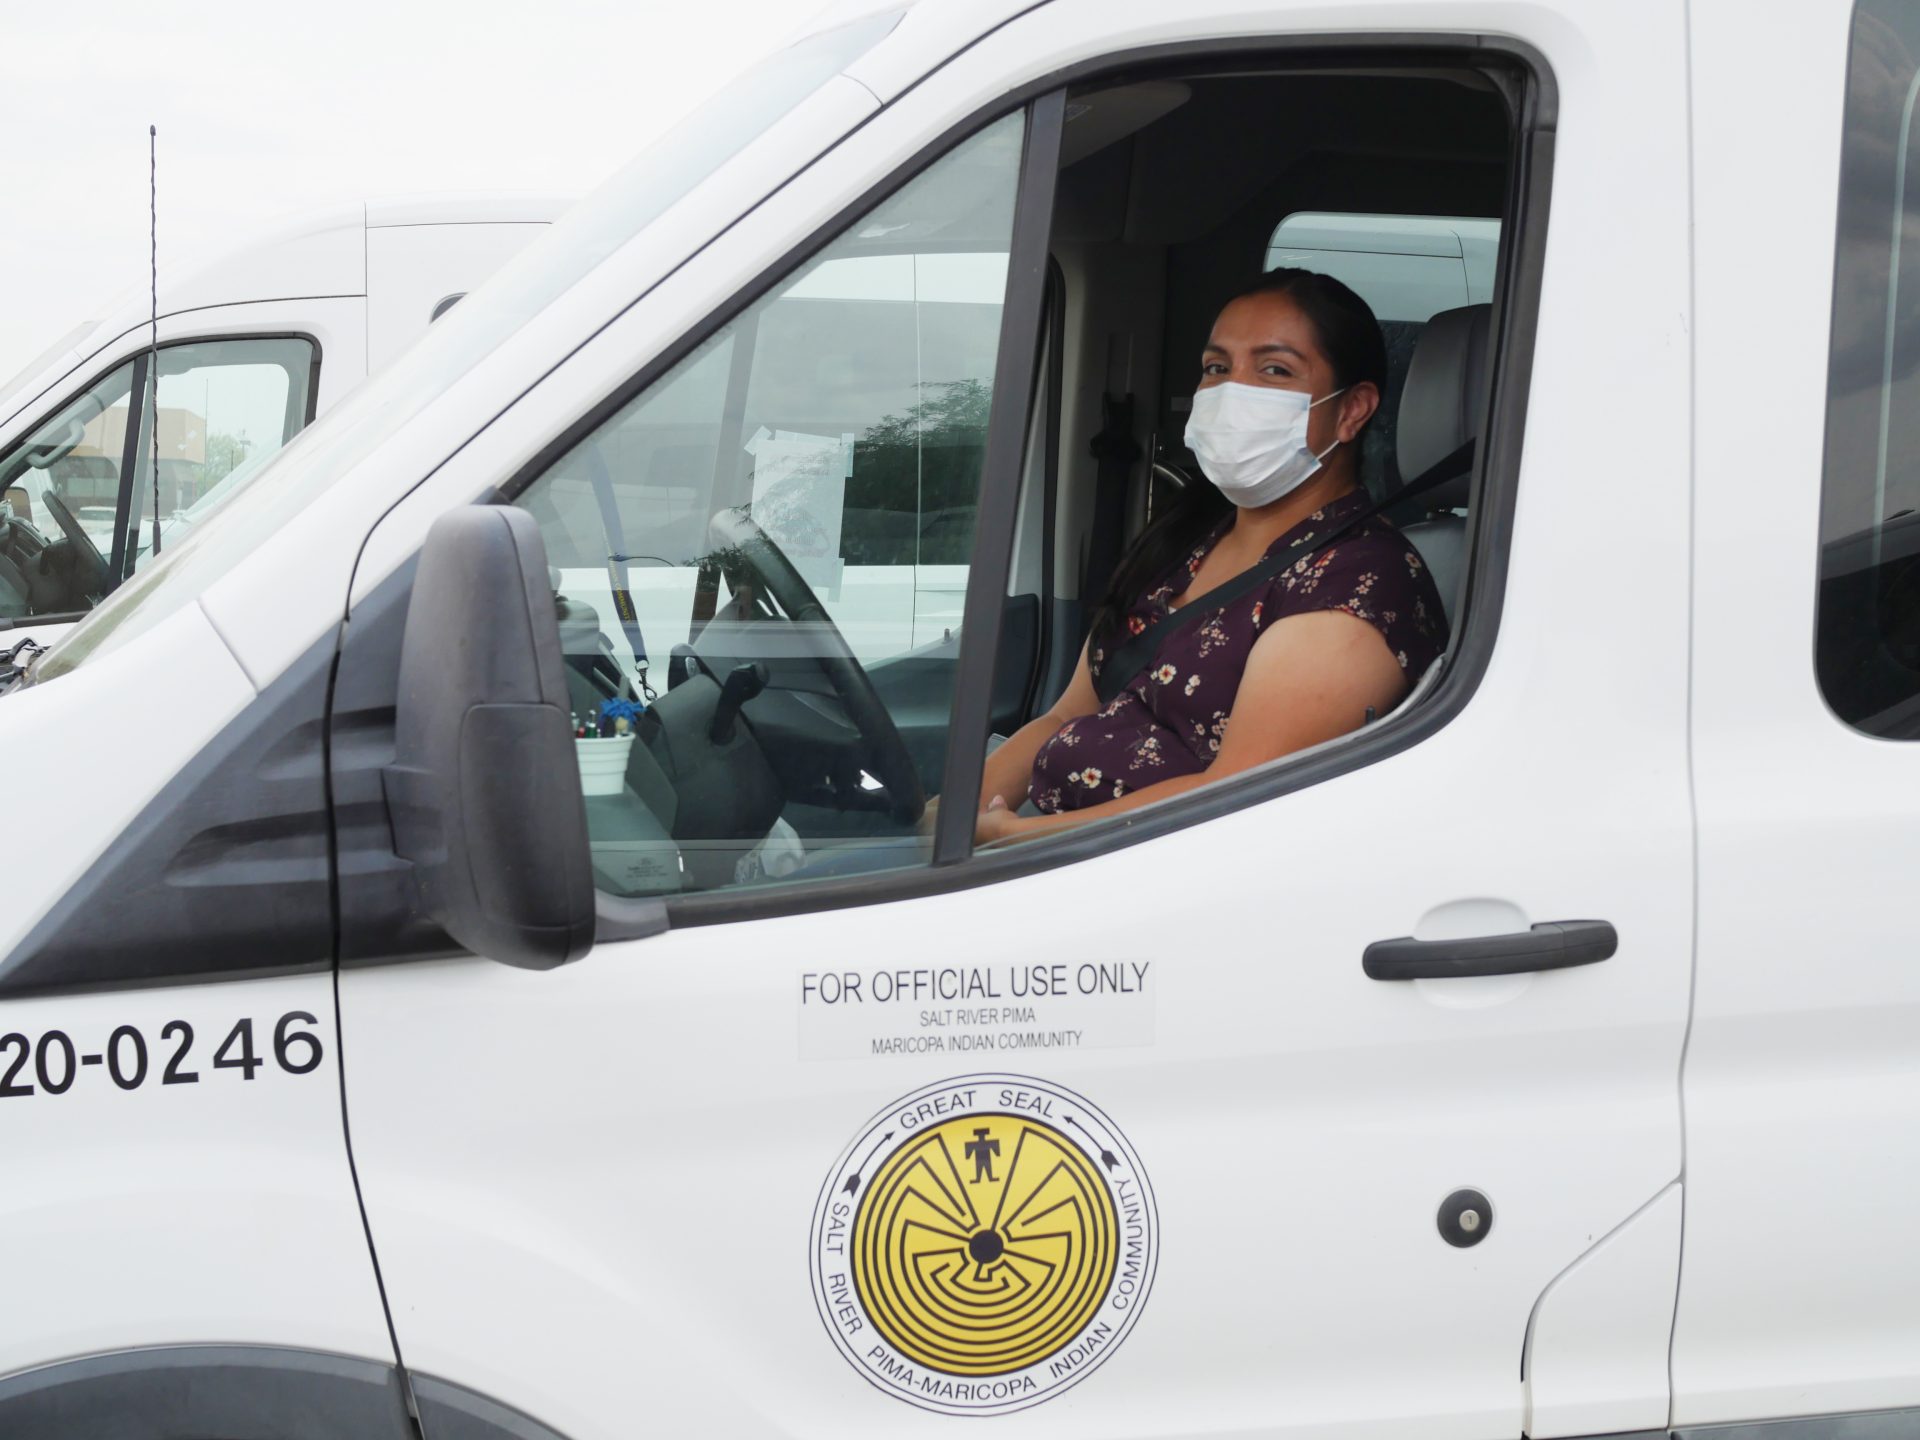 Essential Workers Spotlight: Health Service Transportation Drivers